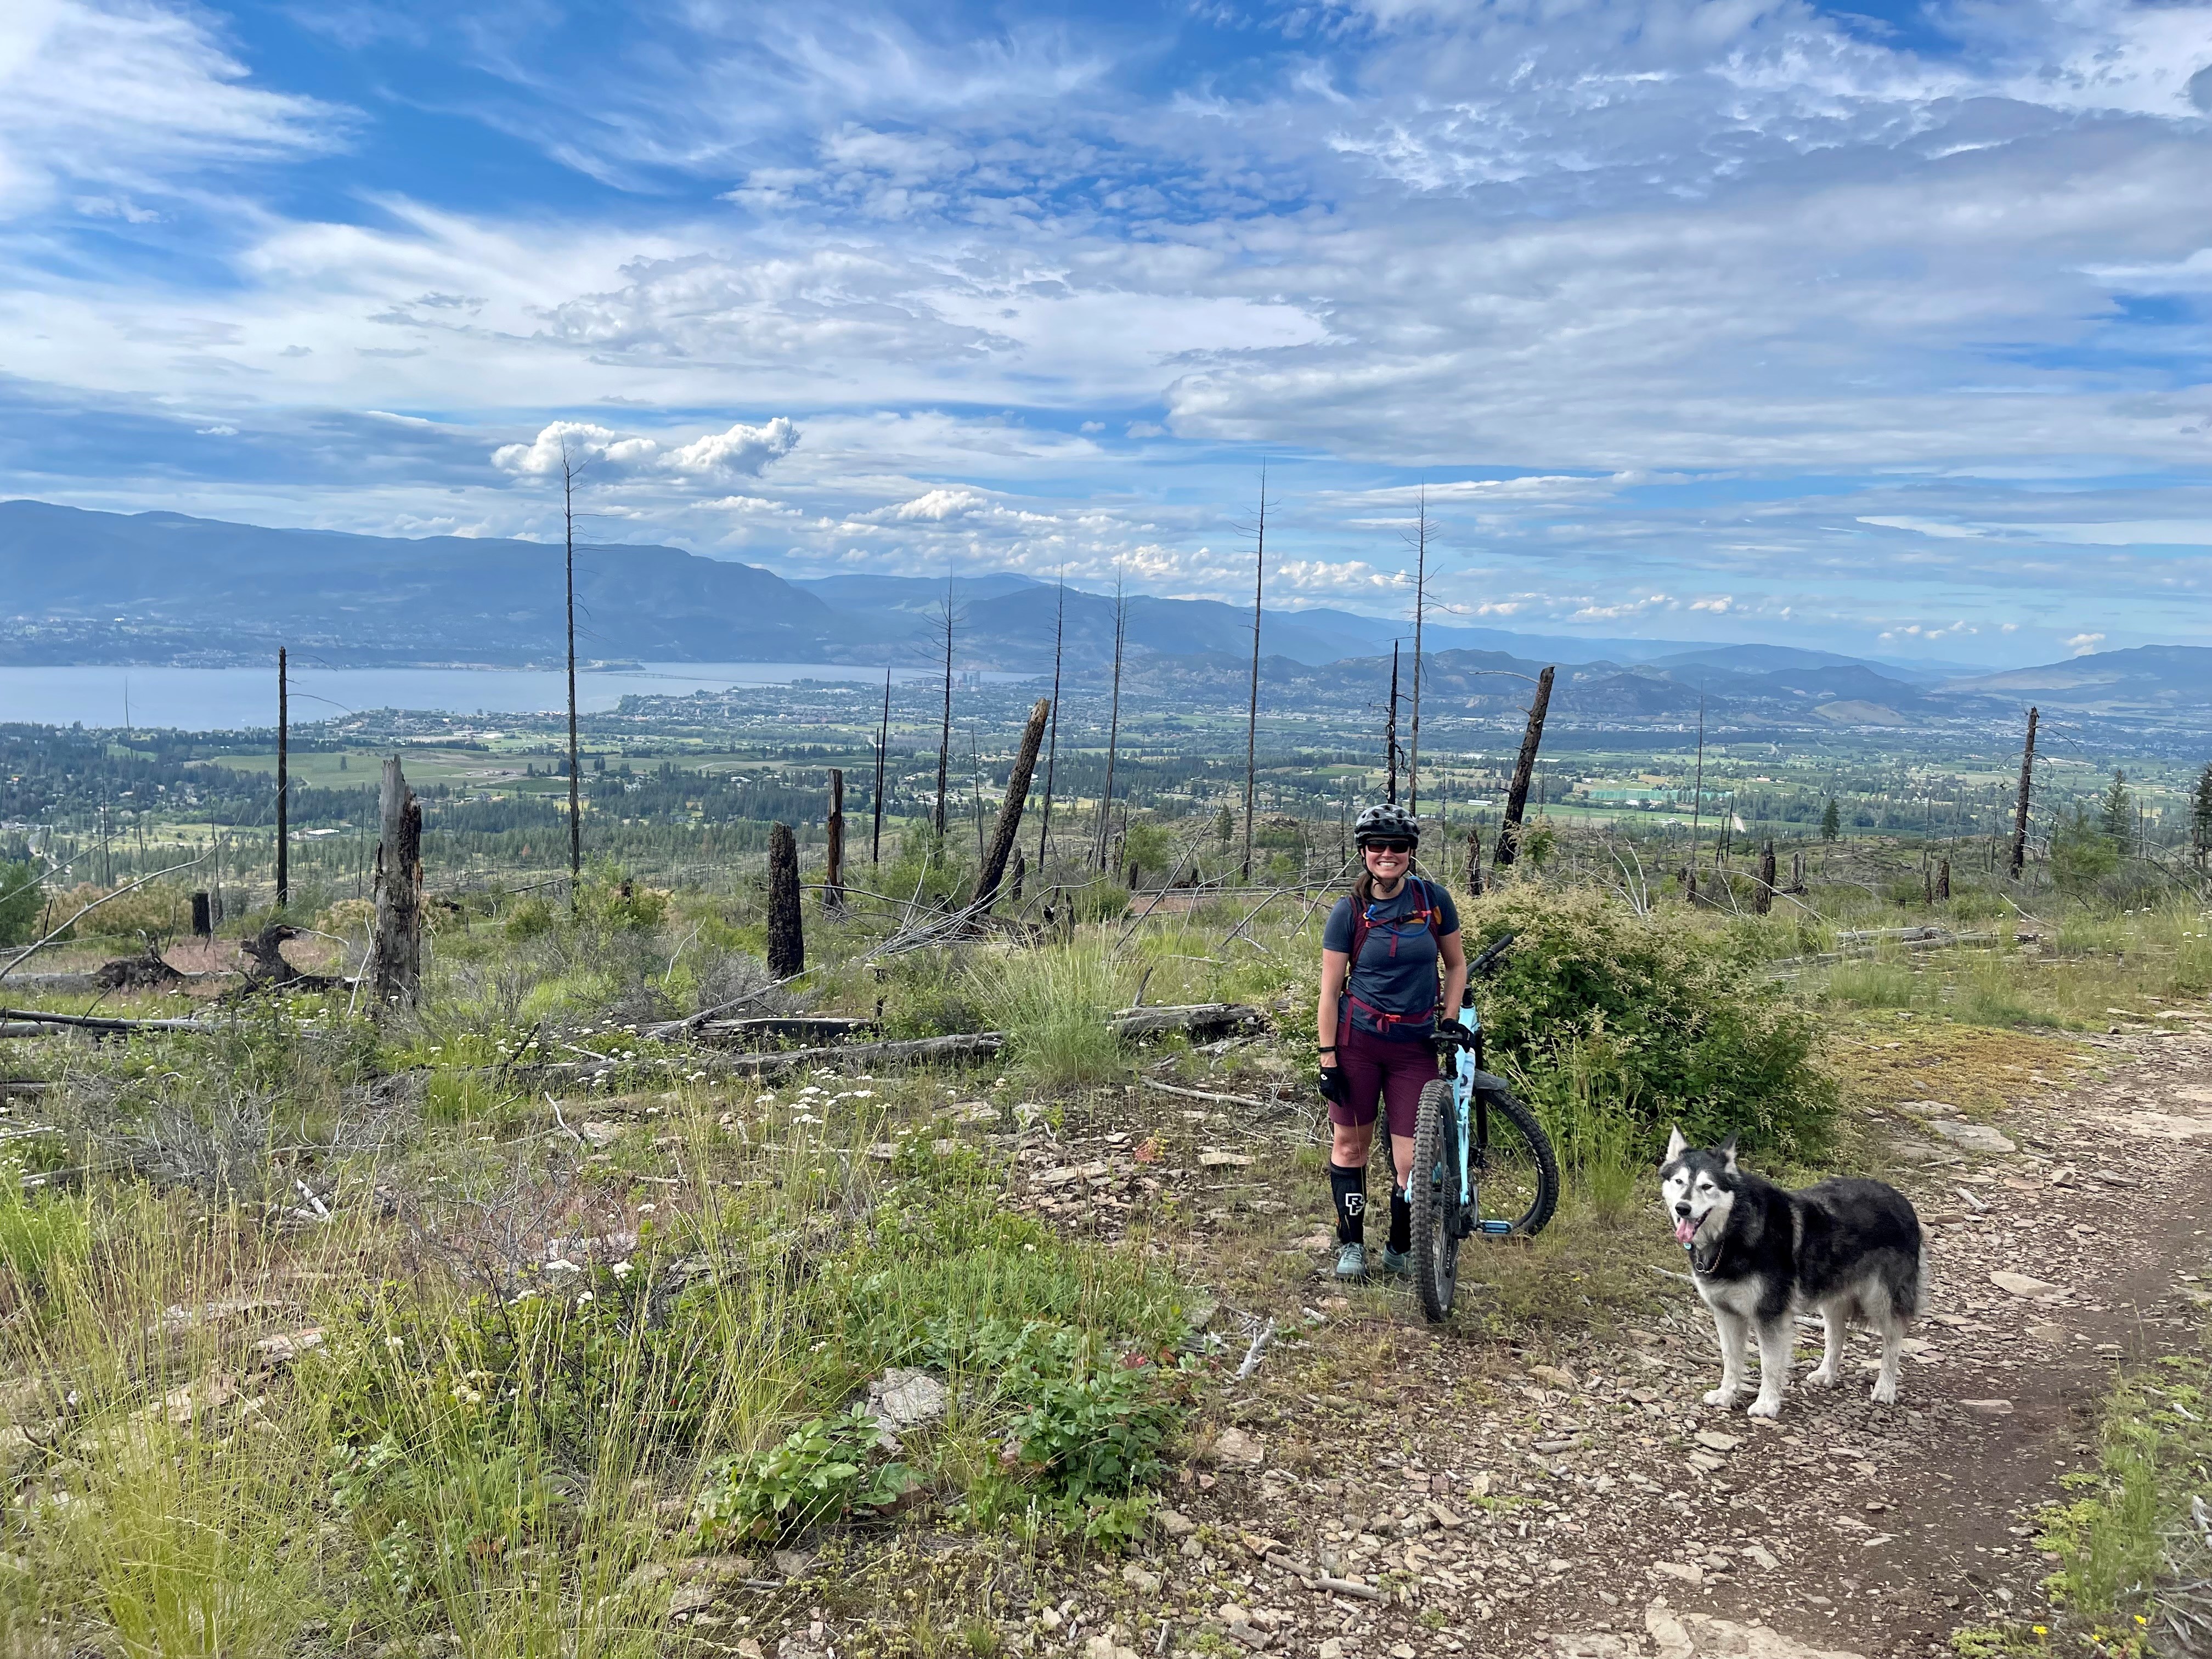 A woman poses on her mountain bike alongside her dog on a trail.